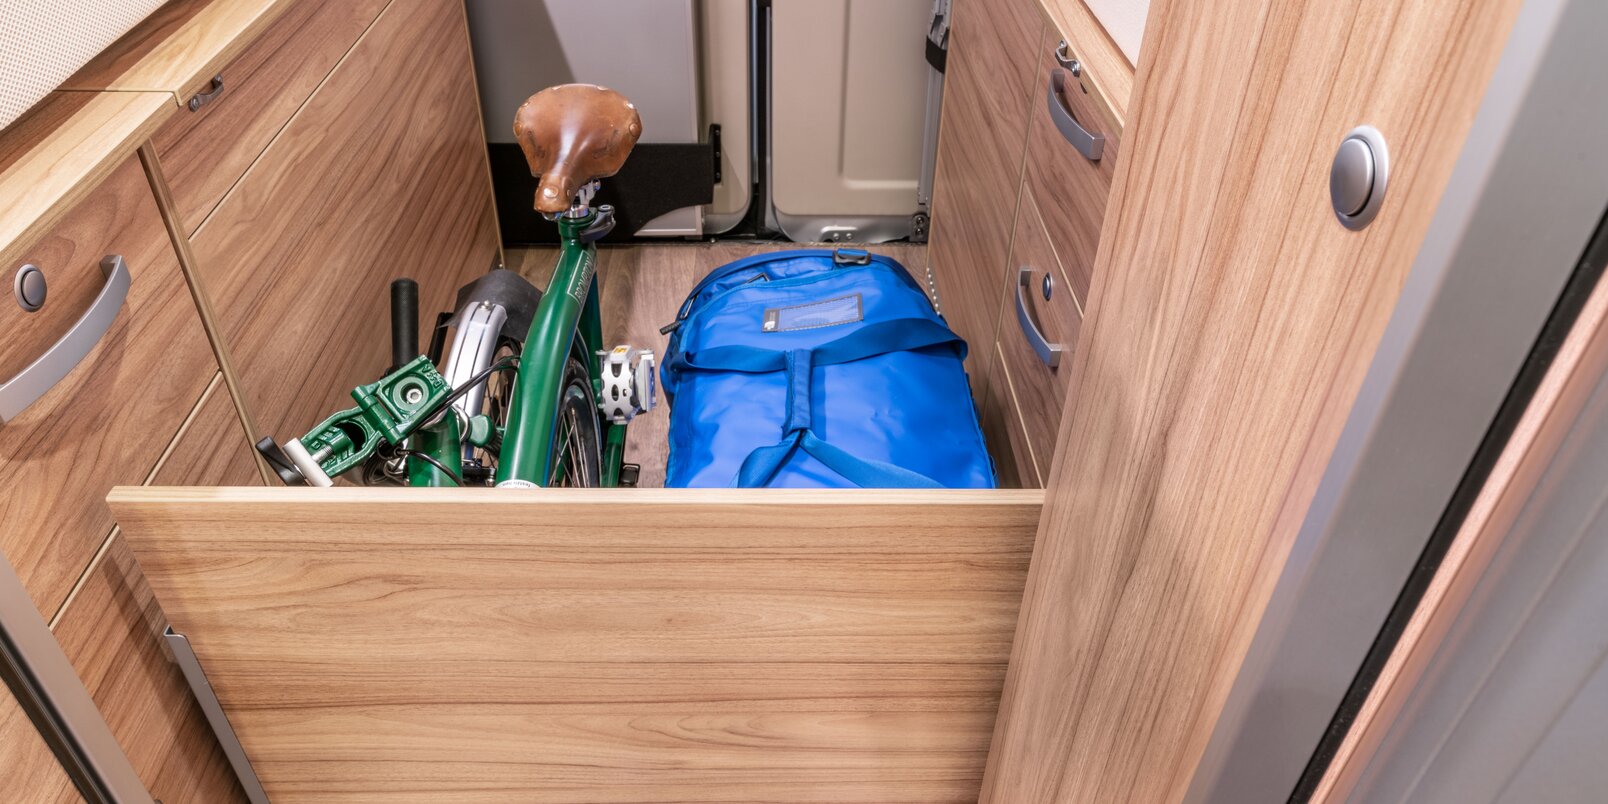 Storage space separated by a board - filled with a blue travel bag and green folding bike - on the floor of the HYMER Camper Van